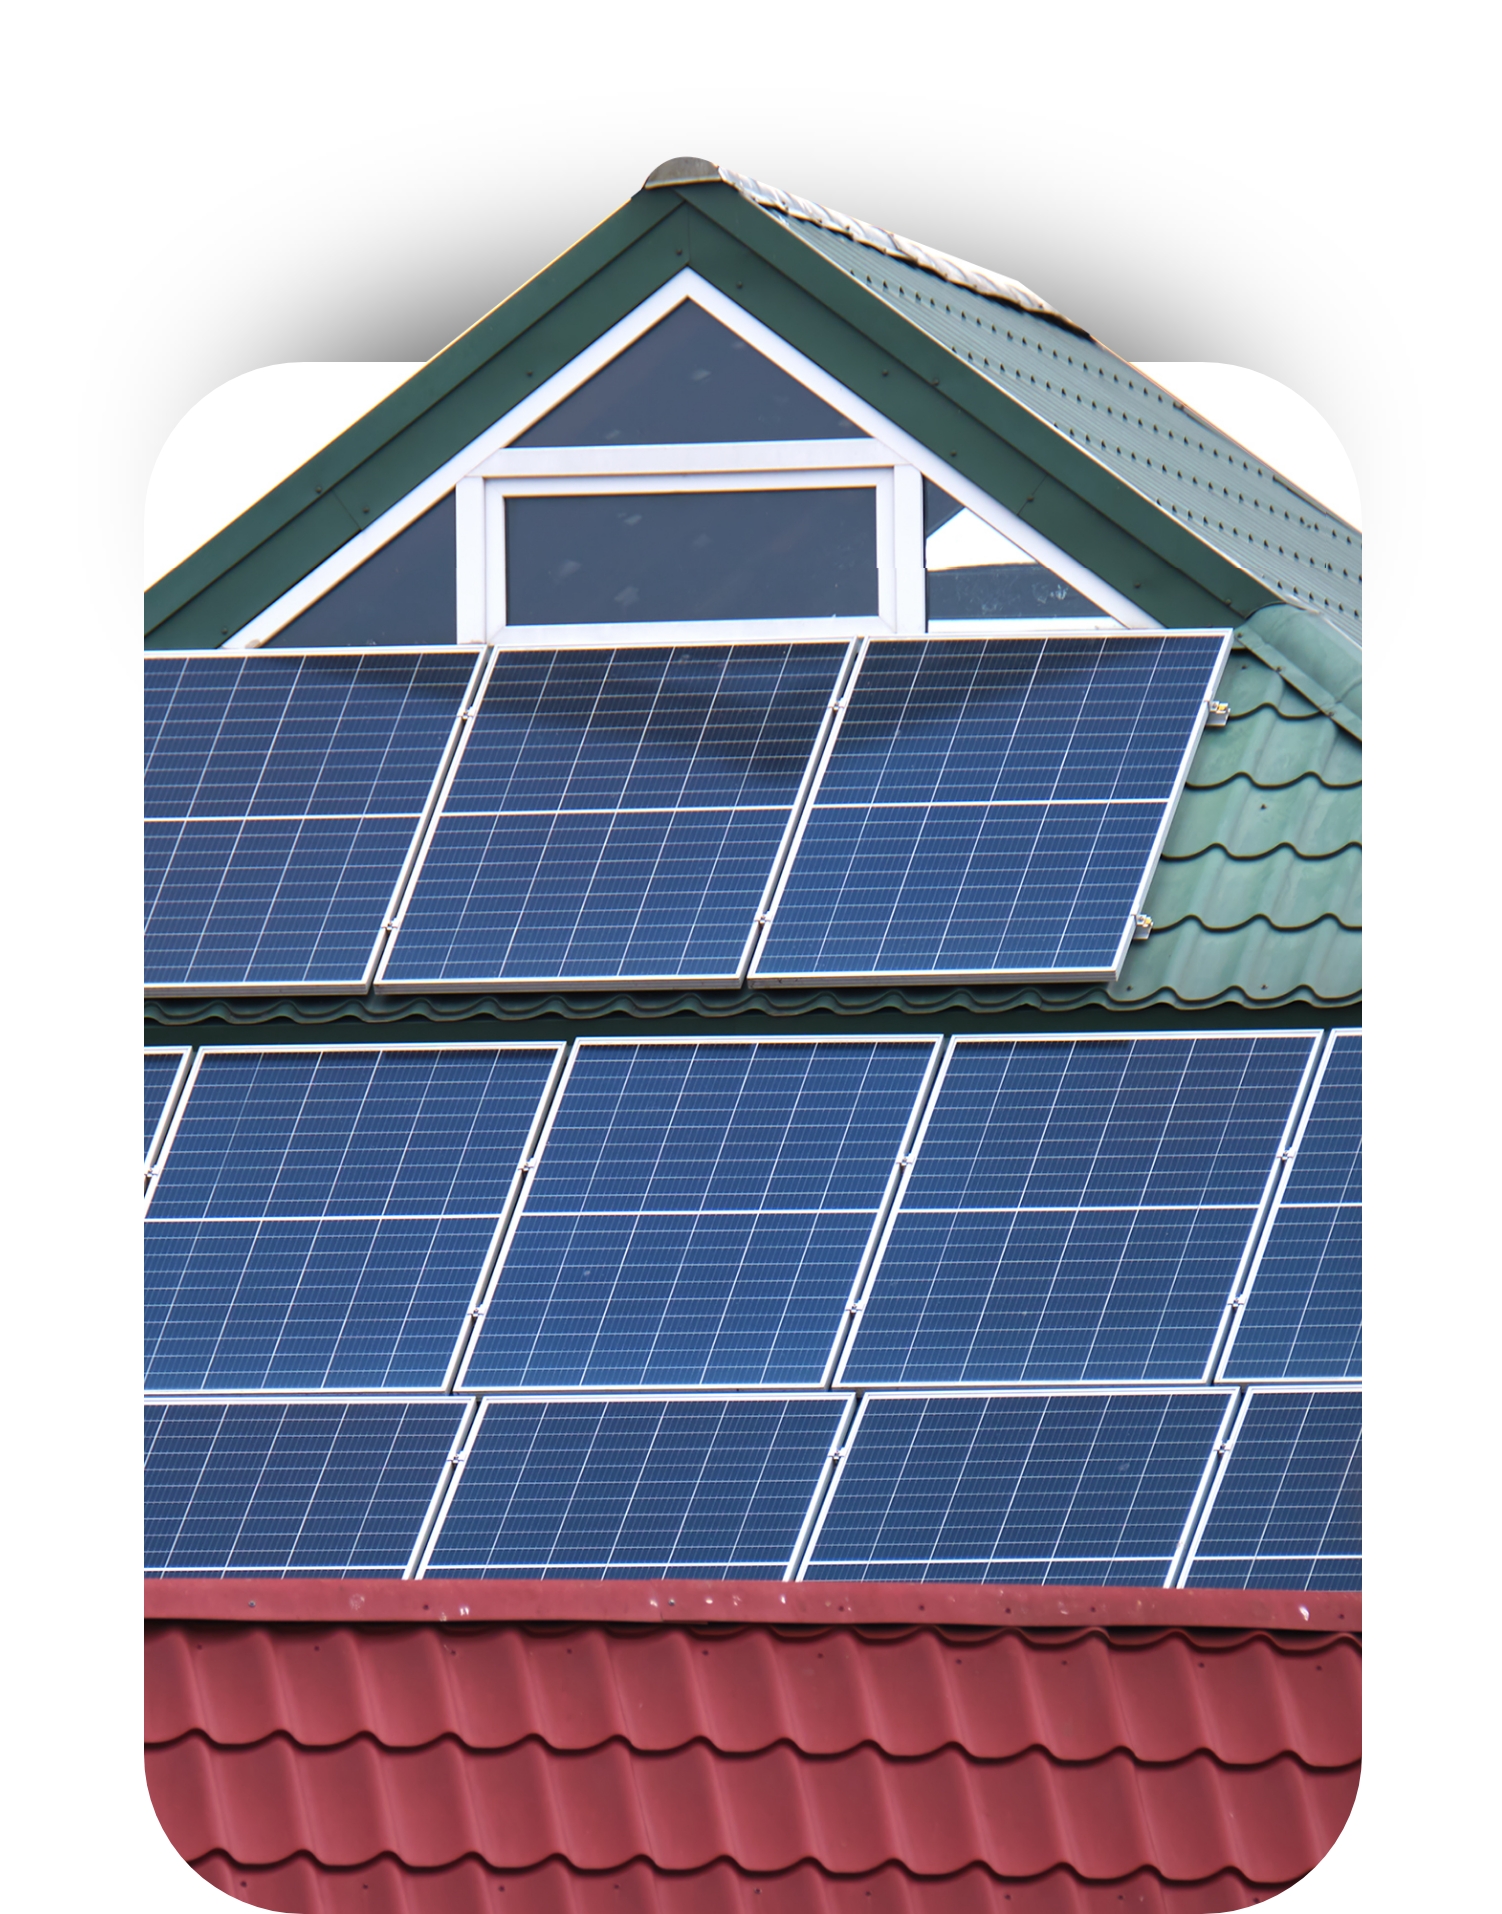 When we install solar panels and solar equipment at your home, rest assured your solar panel installation will be completed correctly and on-schedule without requiring multiple service visits.